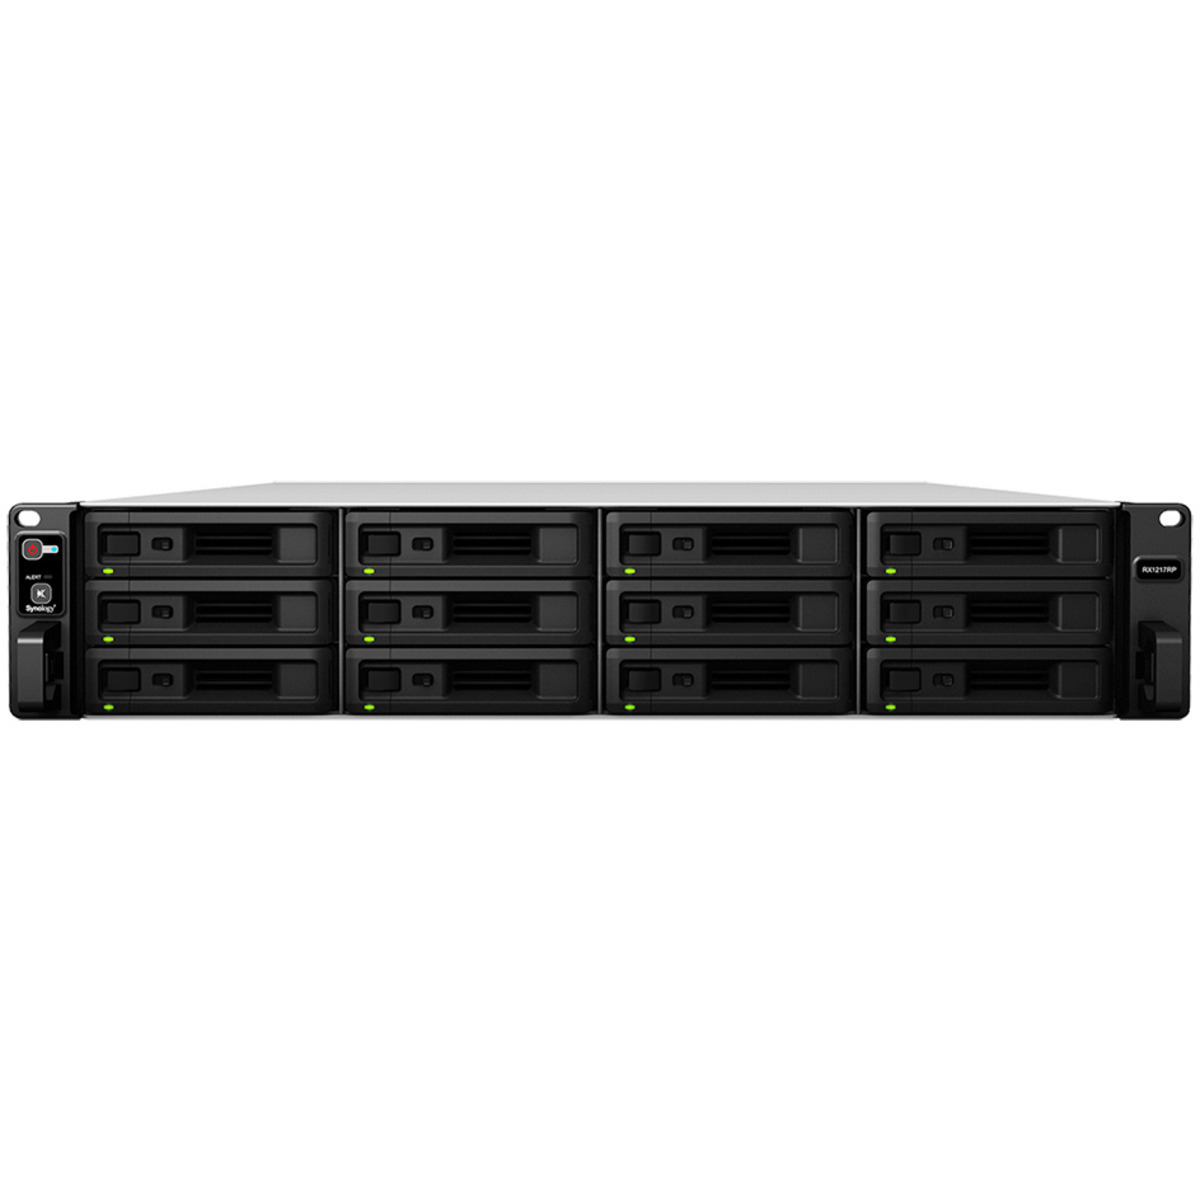 buy $7744 Synology RX1217RP 216tb RackMount Expansion Enclosure 12x18000gb Toshiba Enterprise Capacity MG09ACA18TE 3.5 7200rpm SATA 6Gb/s HDD ENTERPRISE Class Drives Installed - Burn-In Tested - nas headquarters buy network attached storage server device das new raid-5 free shipping usa christmas new year holiday sale RX1217RP